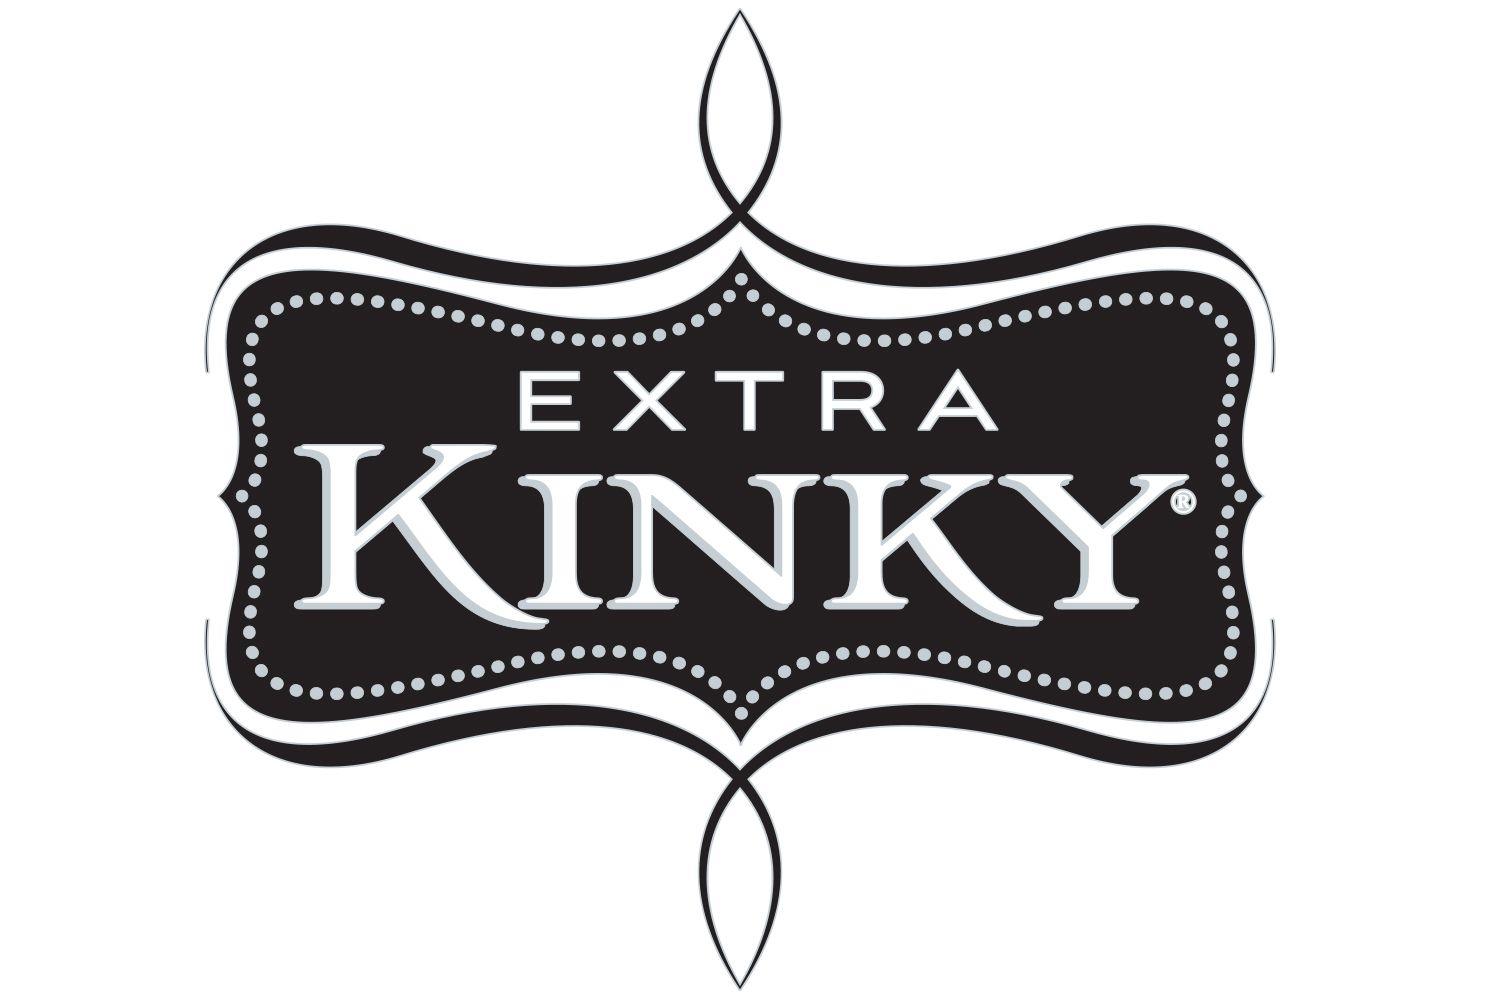 Kinky Logo - EXTRA KINKY Cocktails in Cans Taking Shelves by Storm | Business Wire